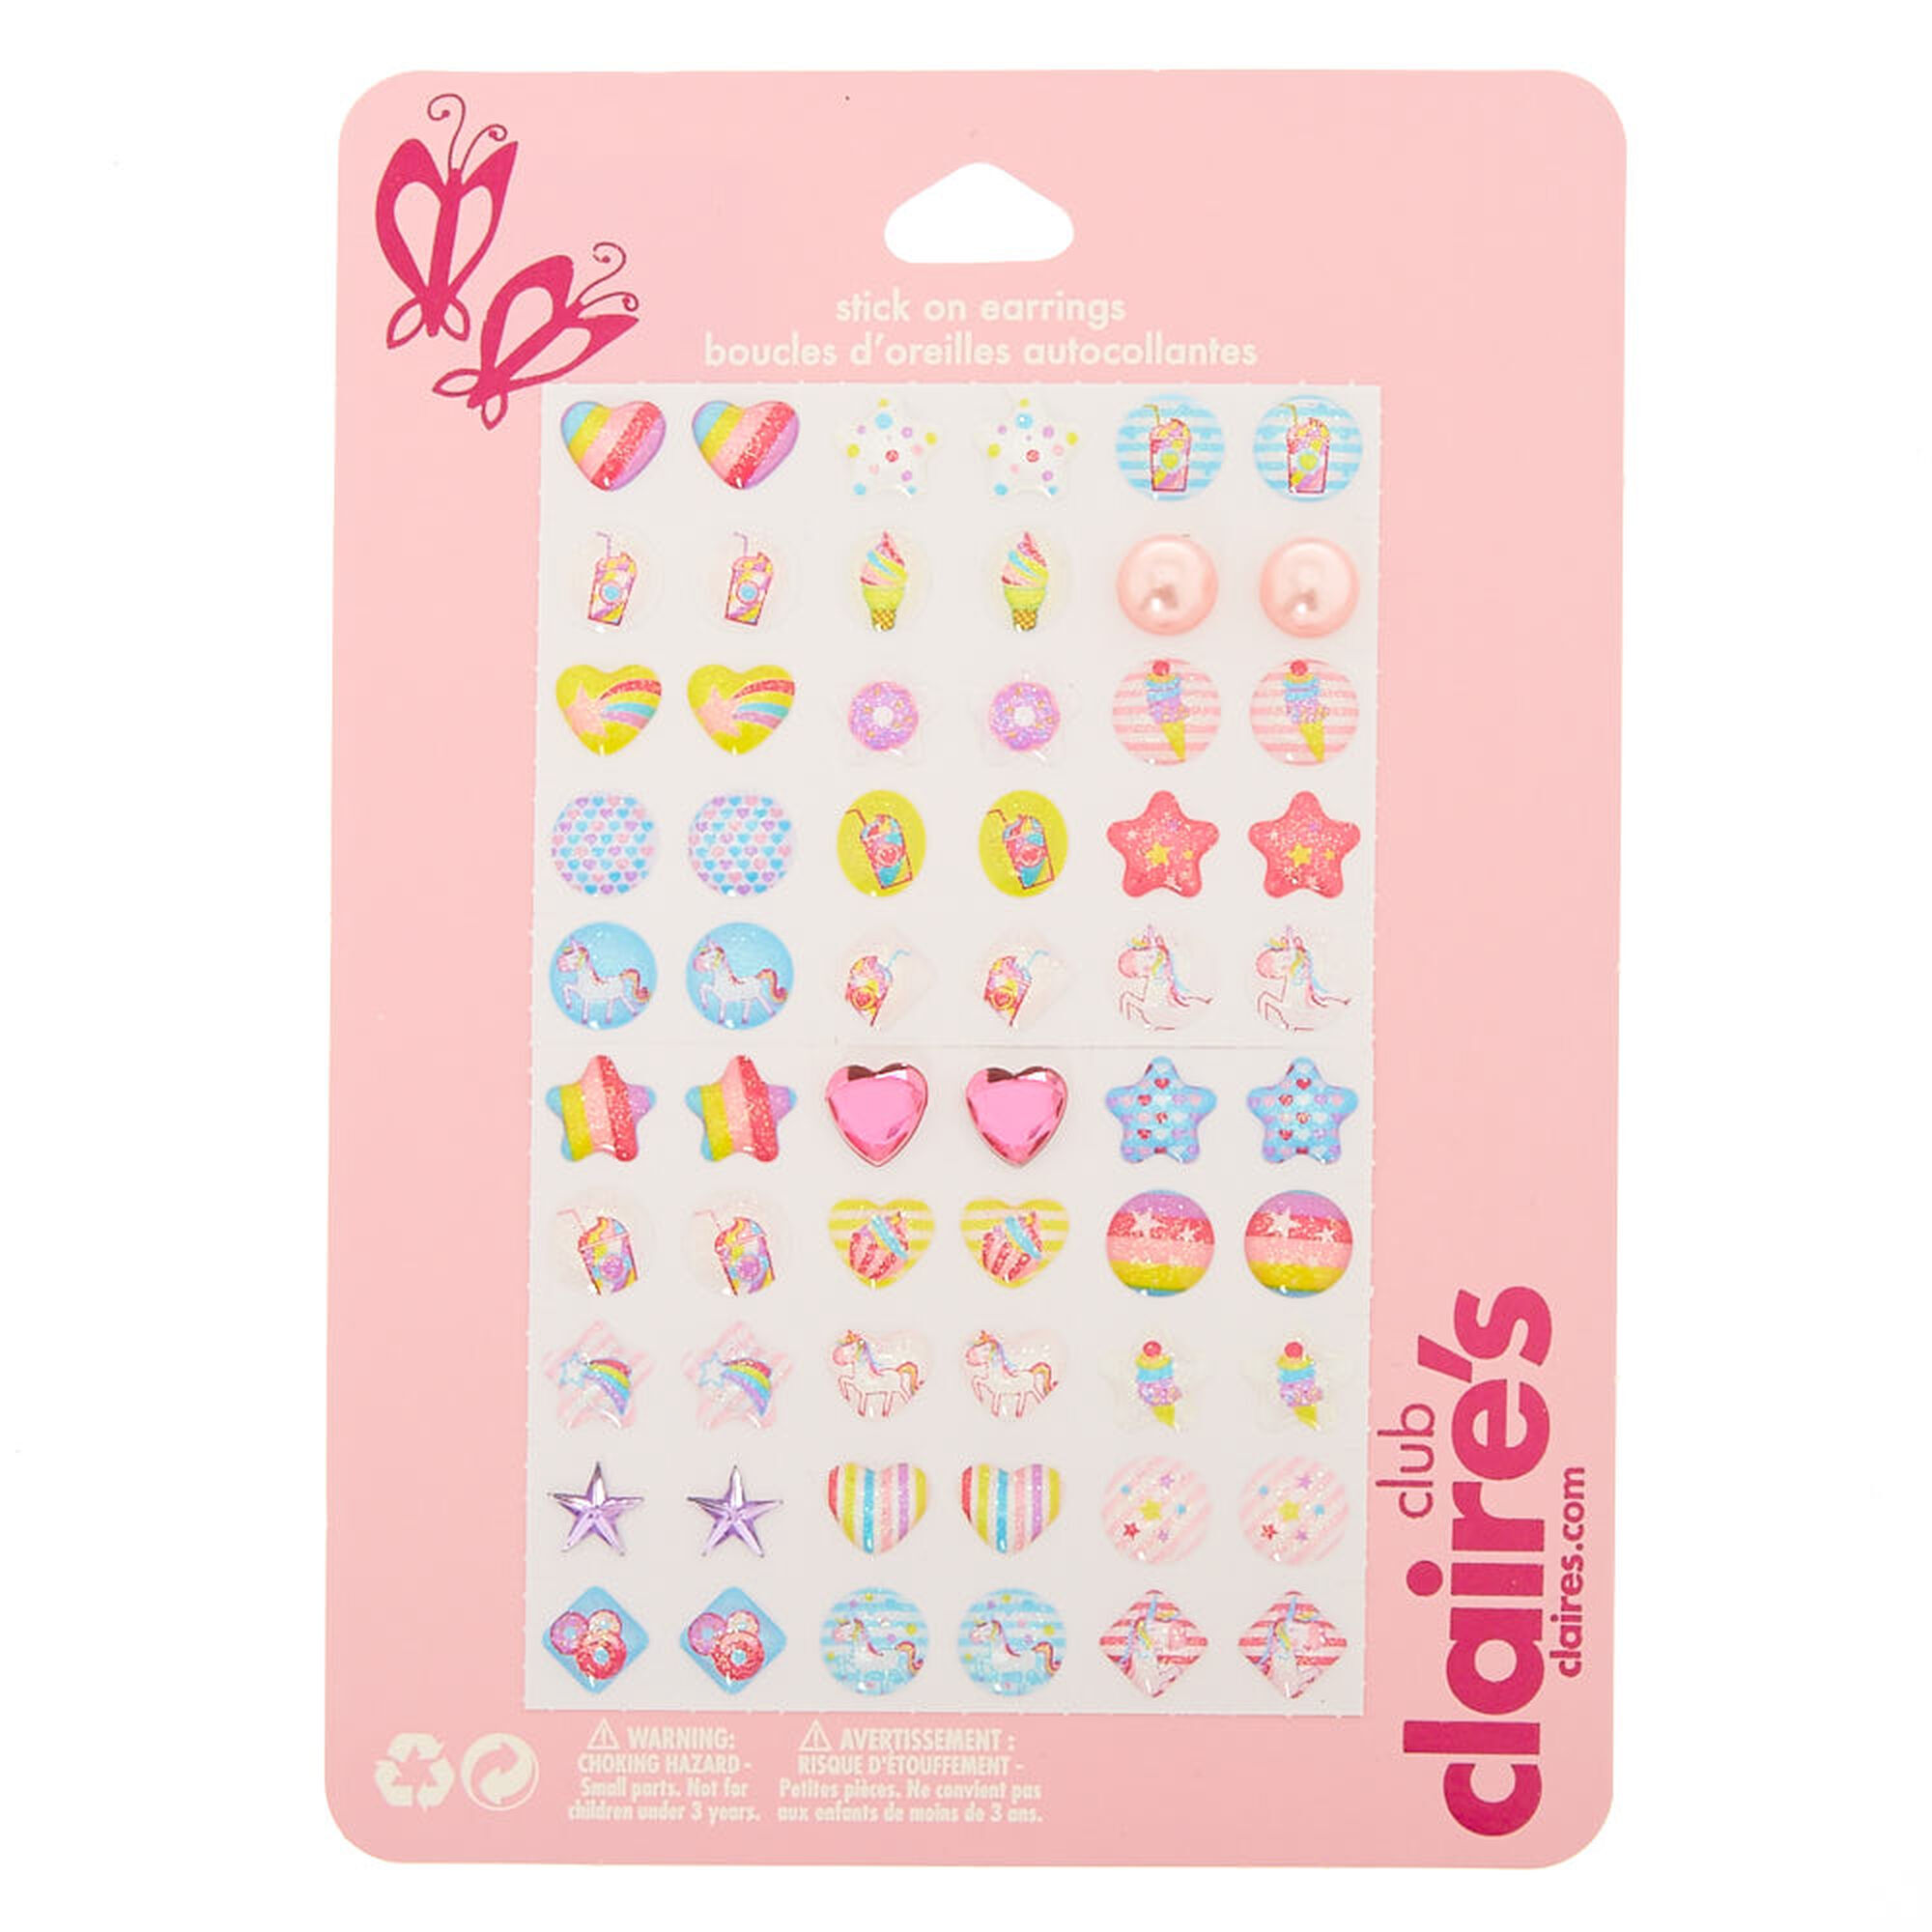 Unicorns and Such' - Stick-On Earrings-CE87503-M